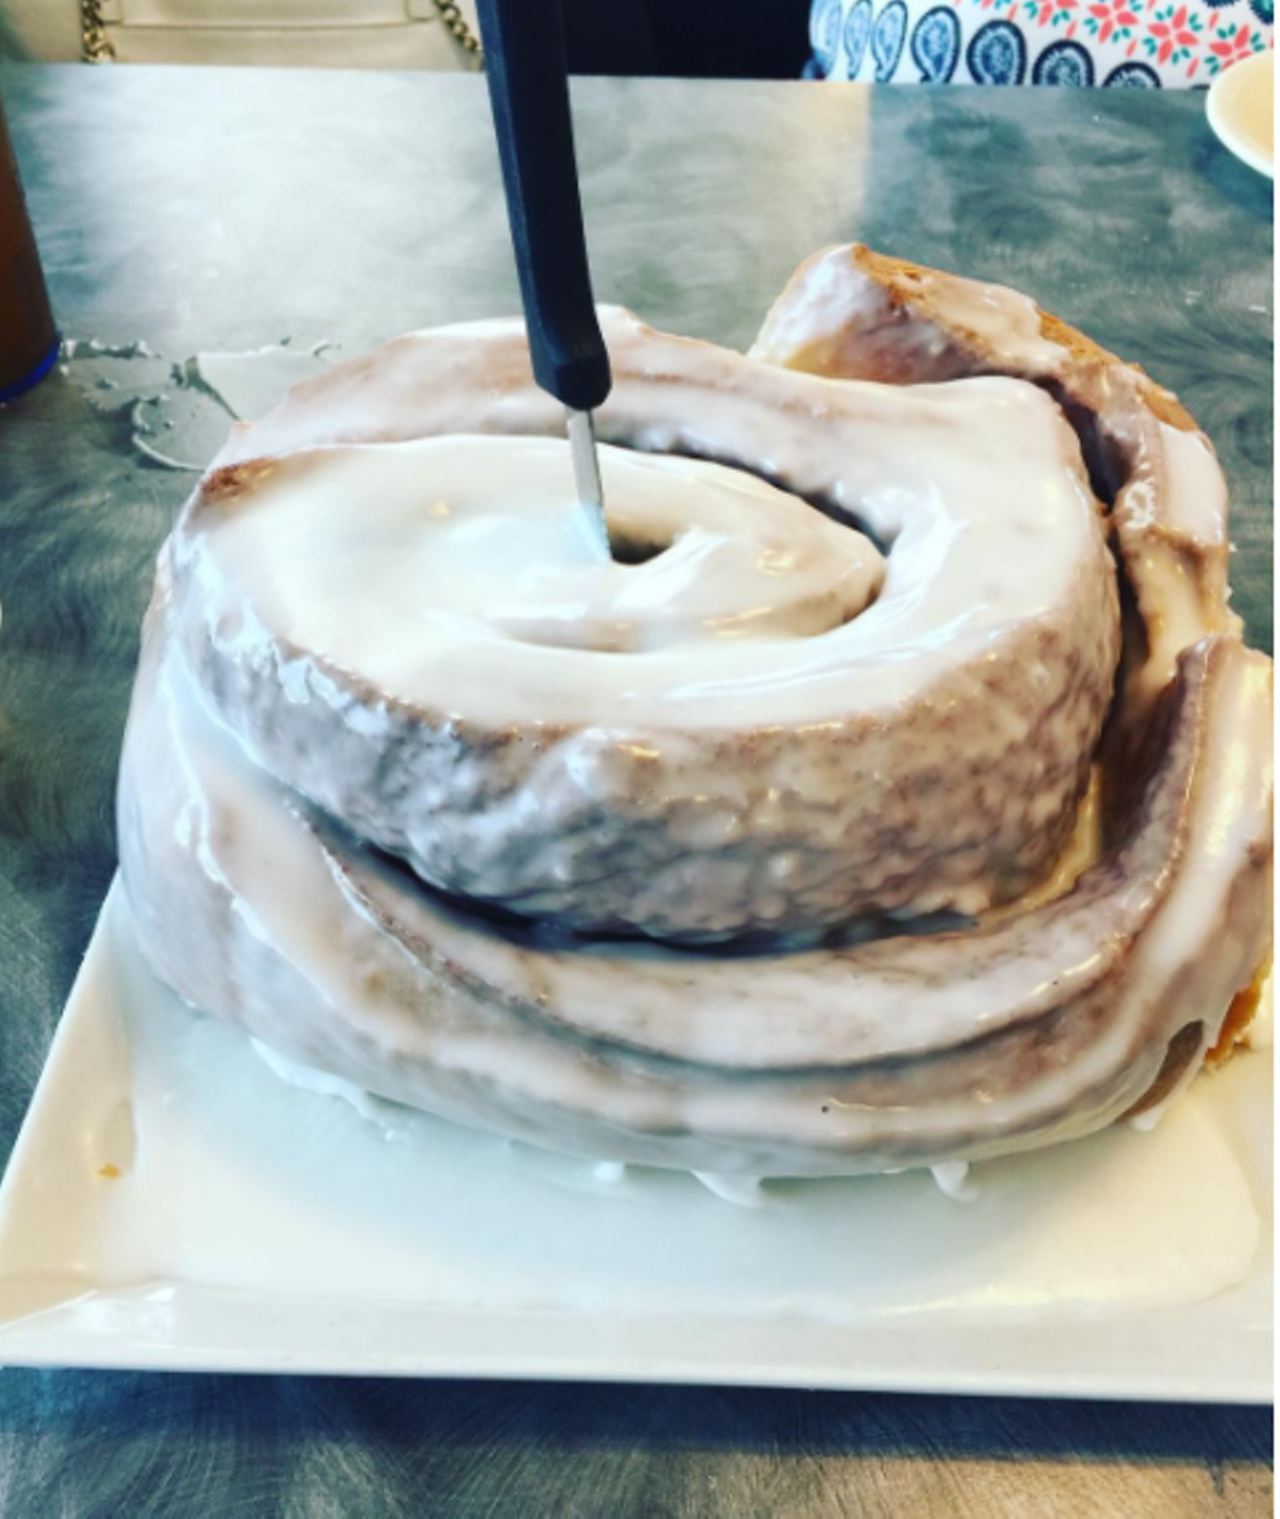 Lulu's Bakery & Cafe
918 N. Main Ave., (210) 222-9422,  lulusbakeryandcafe.com
Home of the biggest cinnamon roll you&#146;ll ever lay your eyes upon. Enough said. 
Photo via Instagram, tabitha_mascorro_
